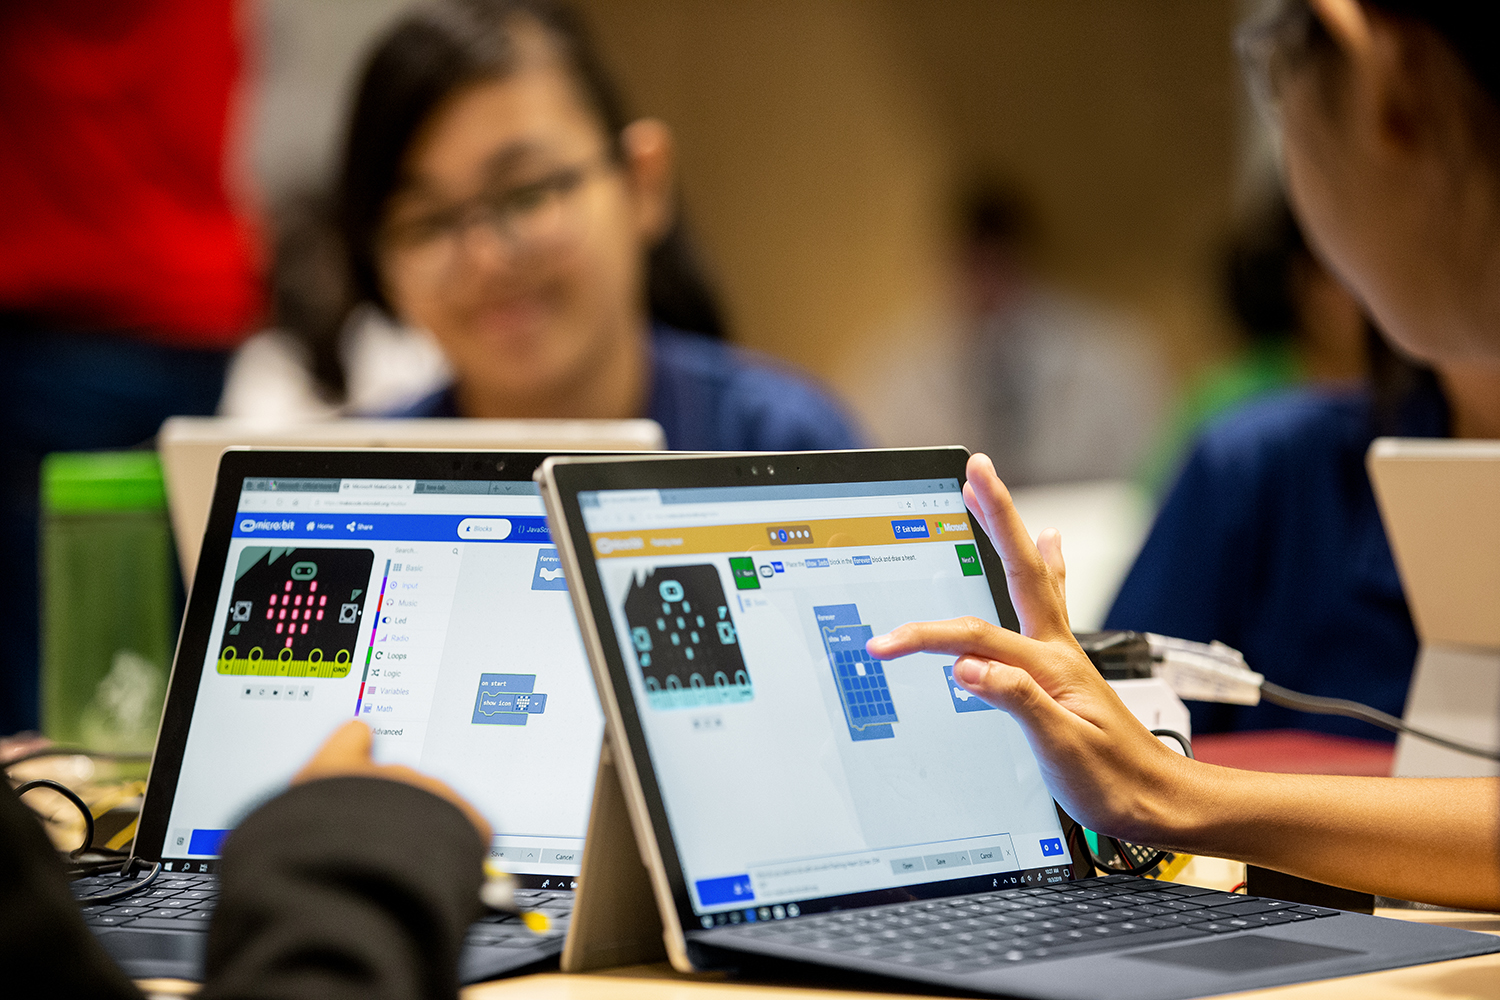 Developing interest in computer science with Microsoft MakeCode